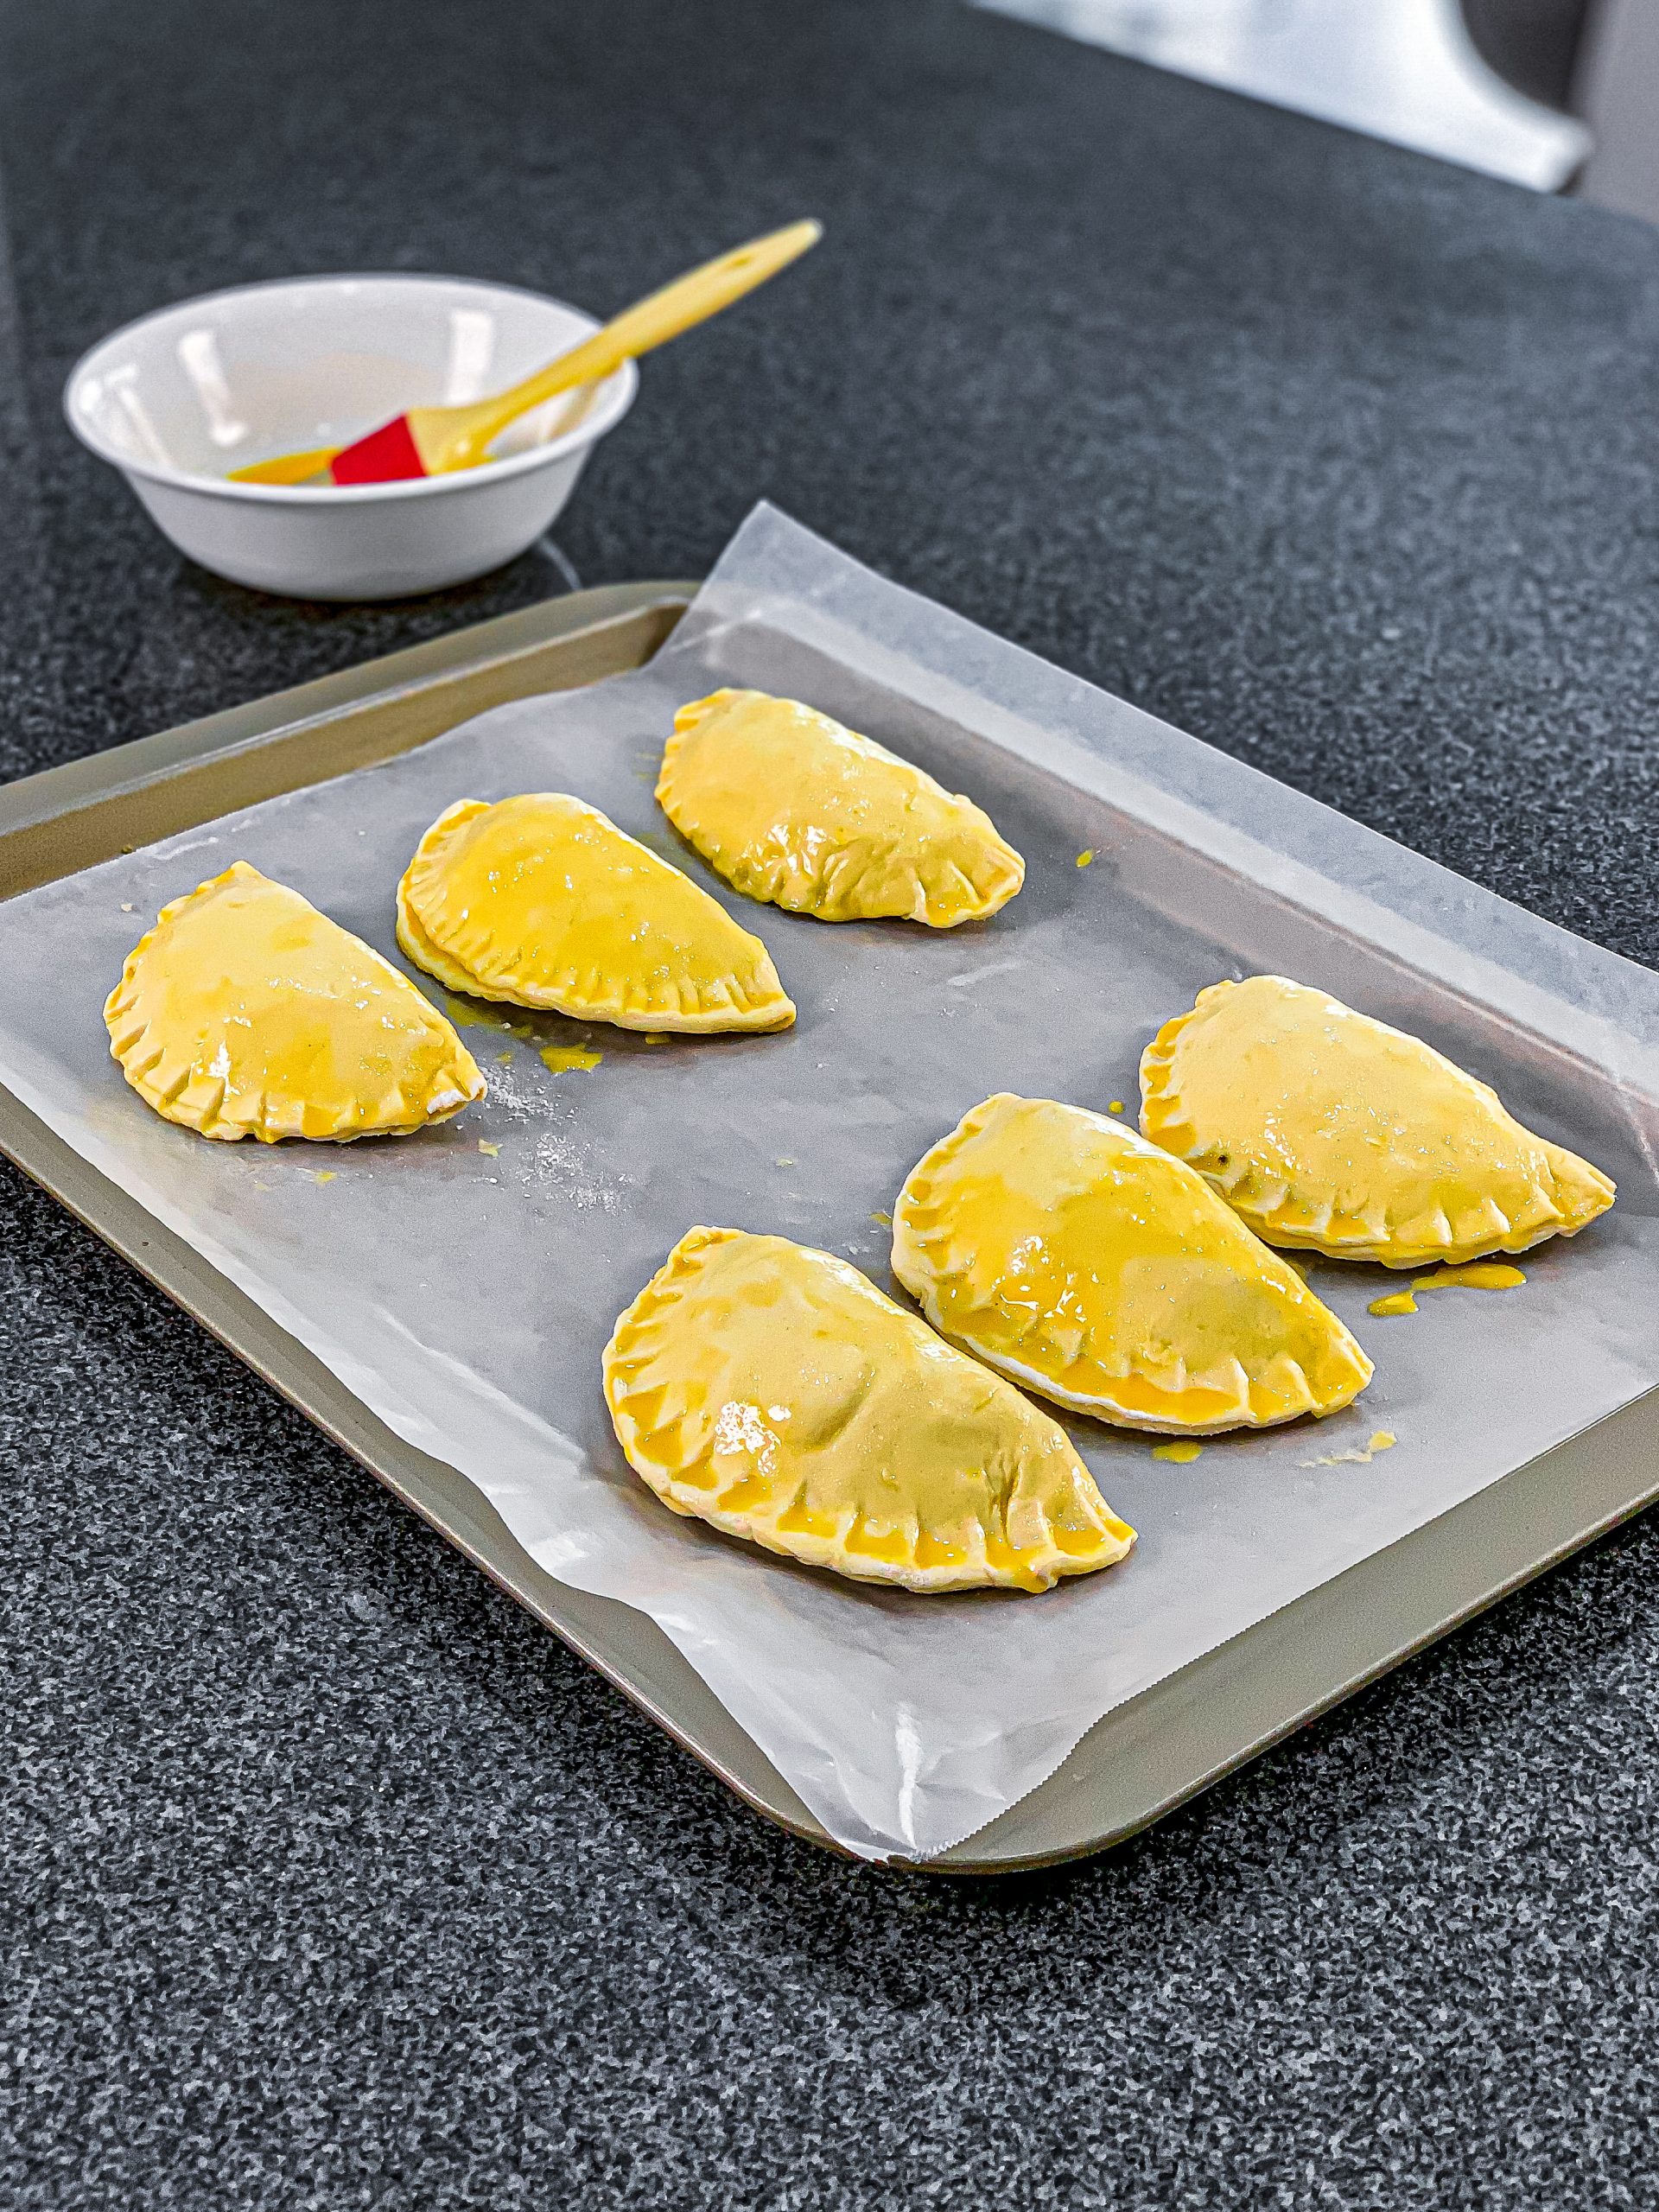 Transfer the meat pies to a lined baking sheet and brush the top of the dough with beaten egg.